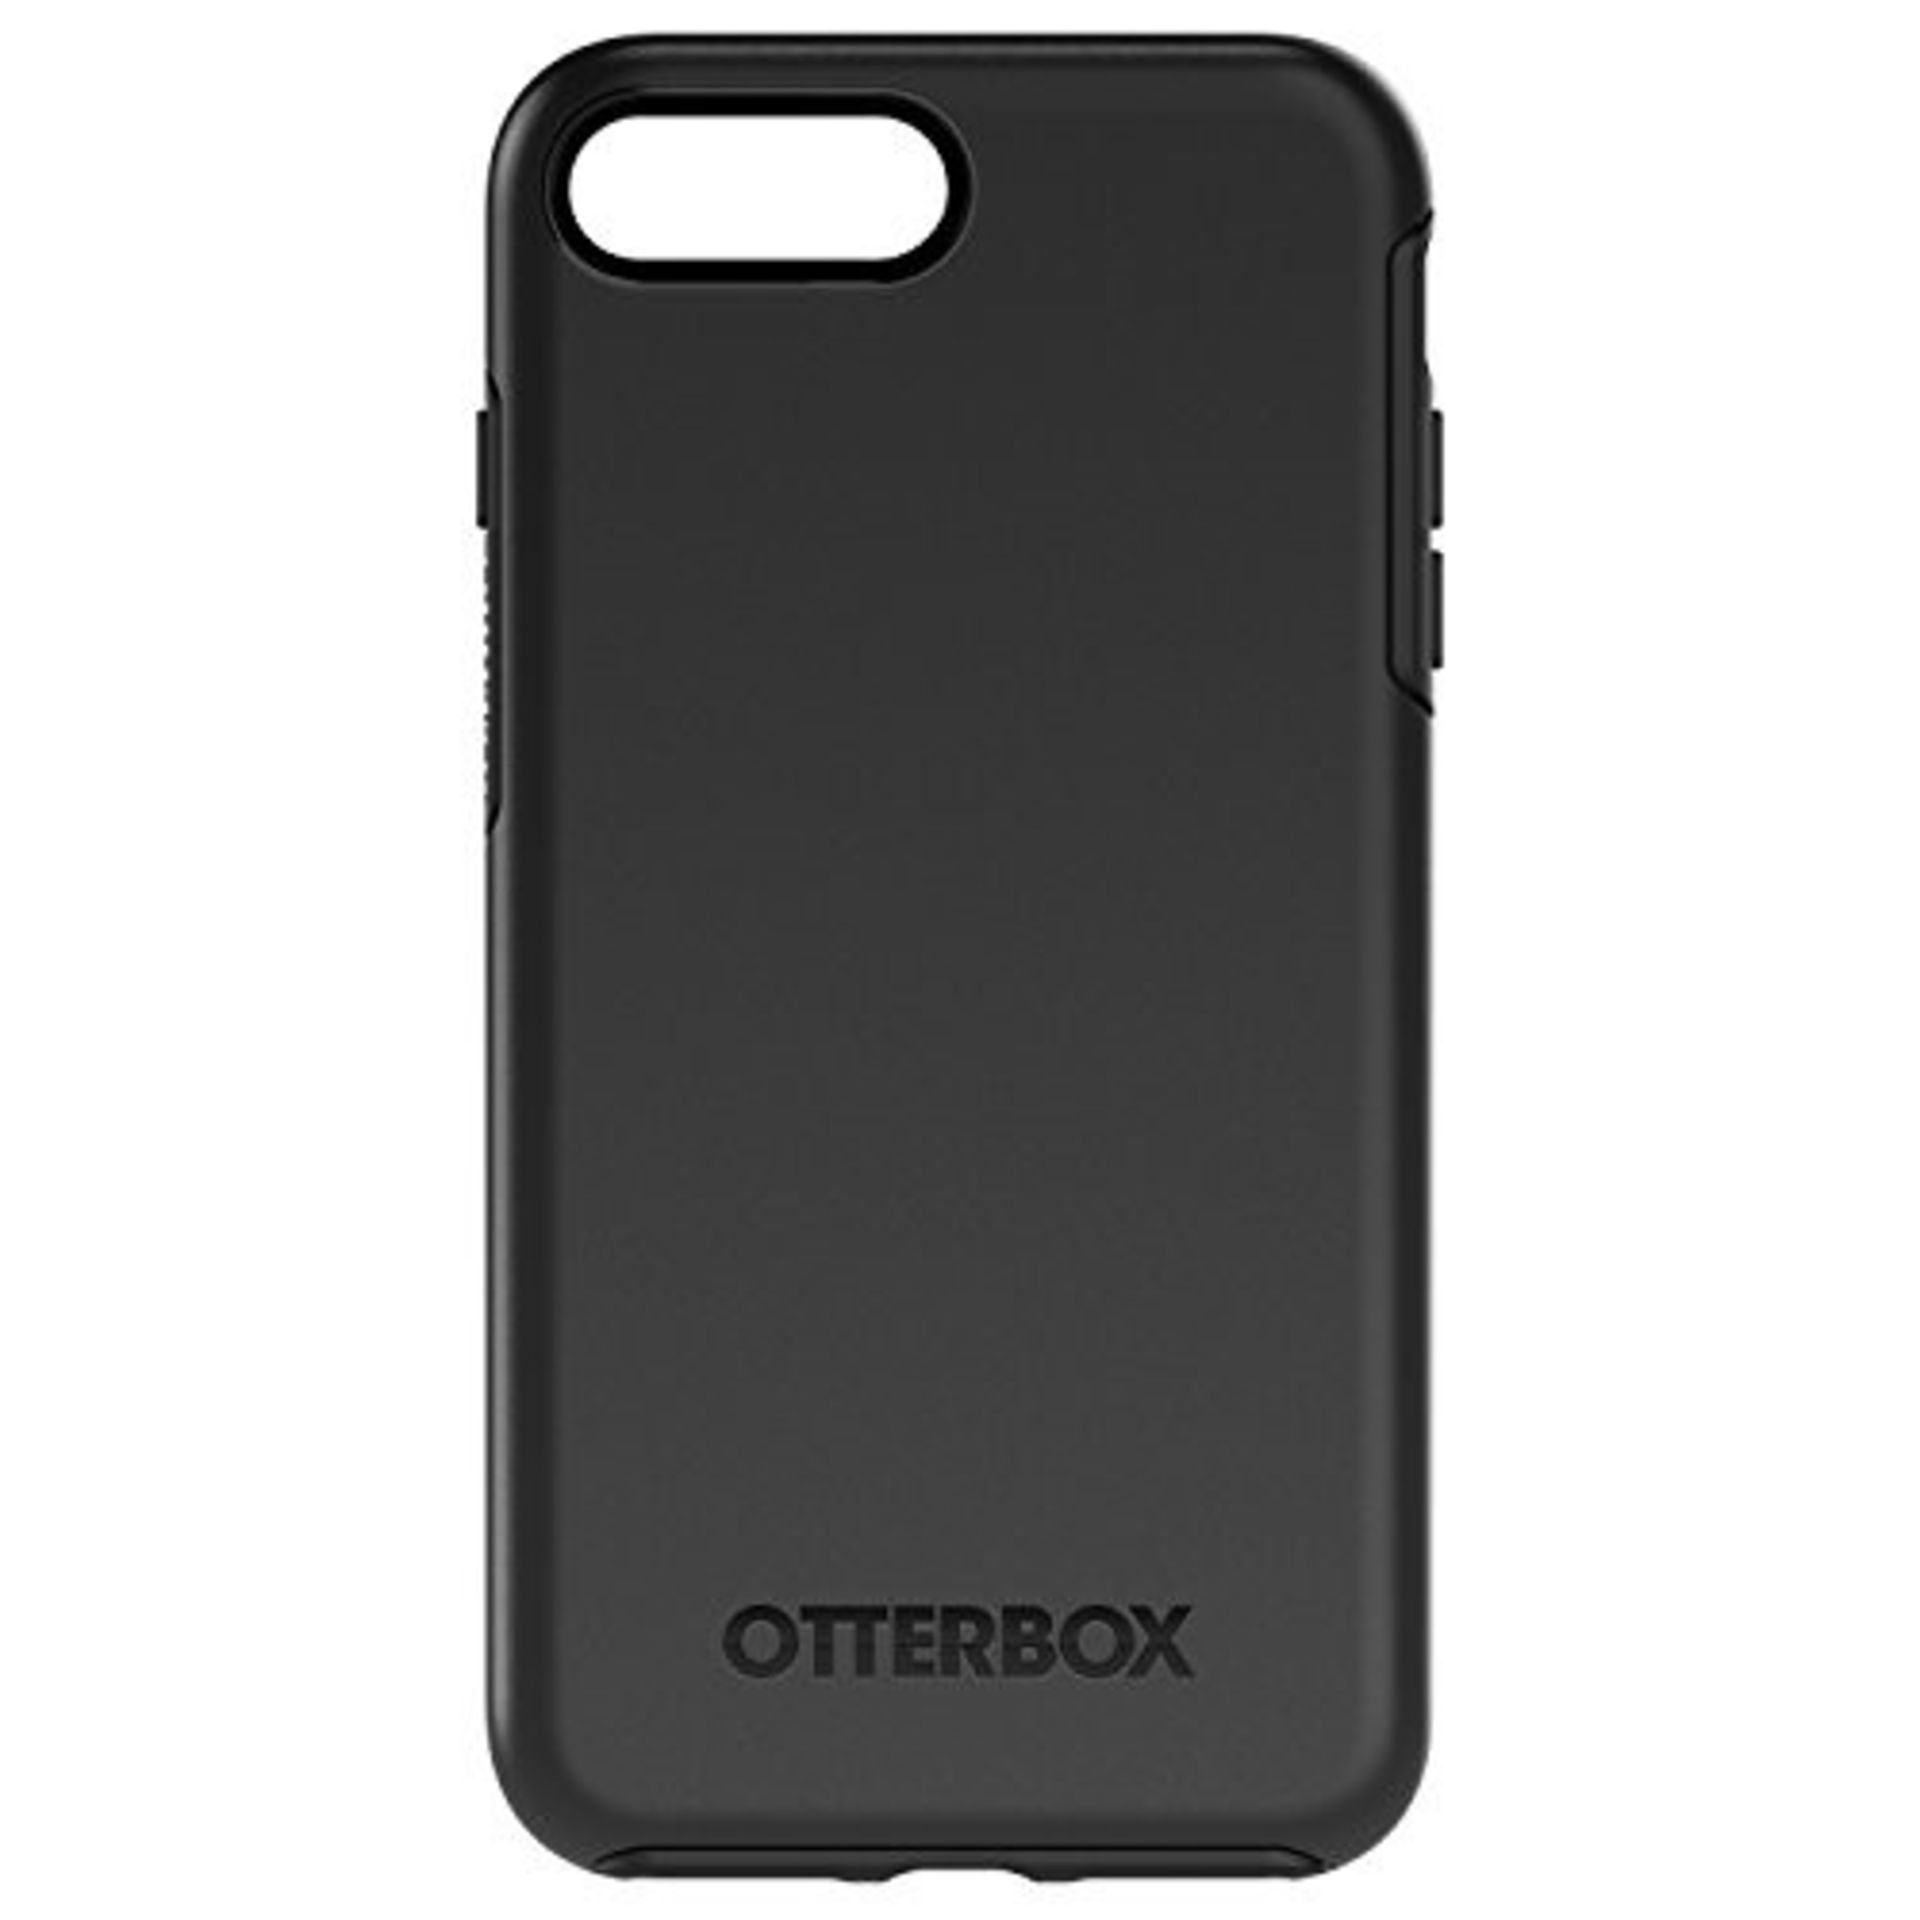 COMBINED RRP £81.00 LOT TO CONTAIN 5 ASSORTED Tech Products: Otterbox, TORRAS, OtterBox, i-Blas - Image 2 of 6